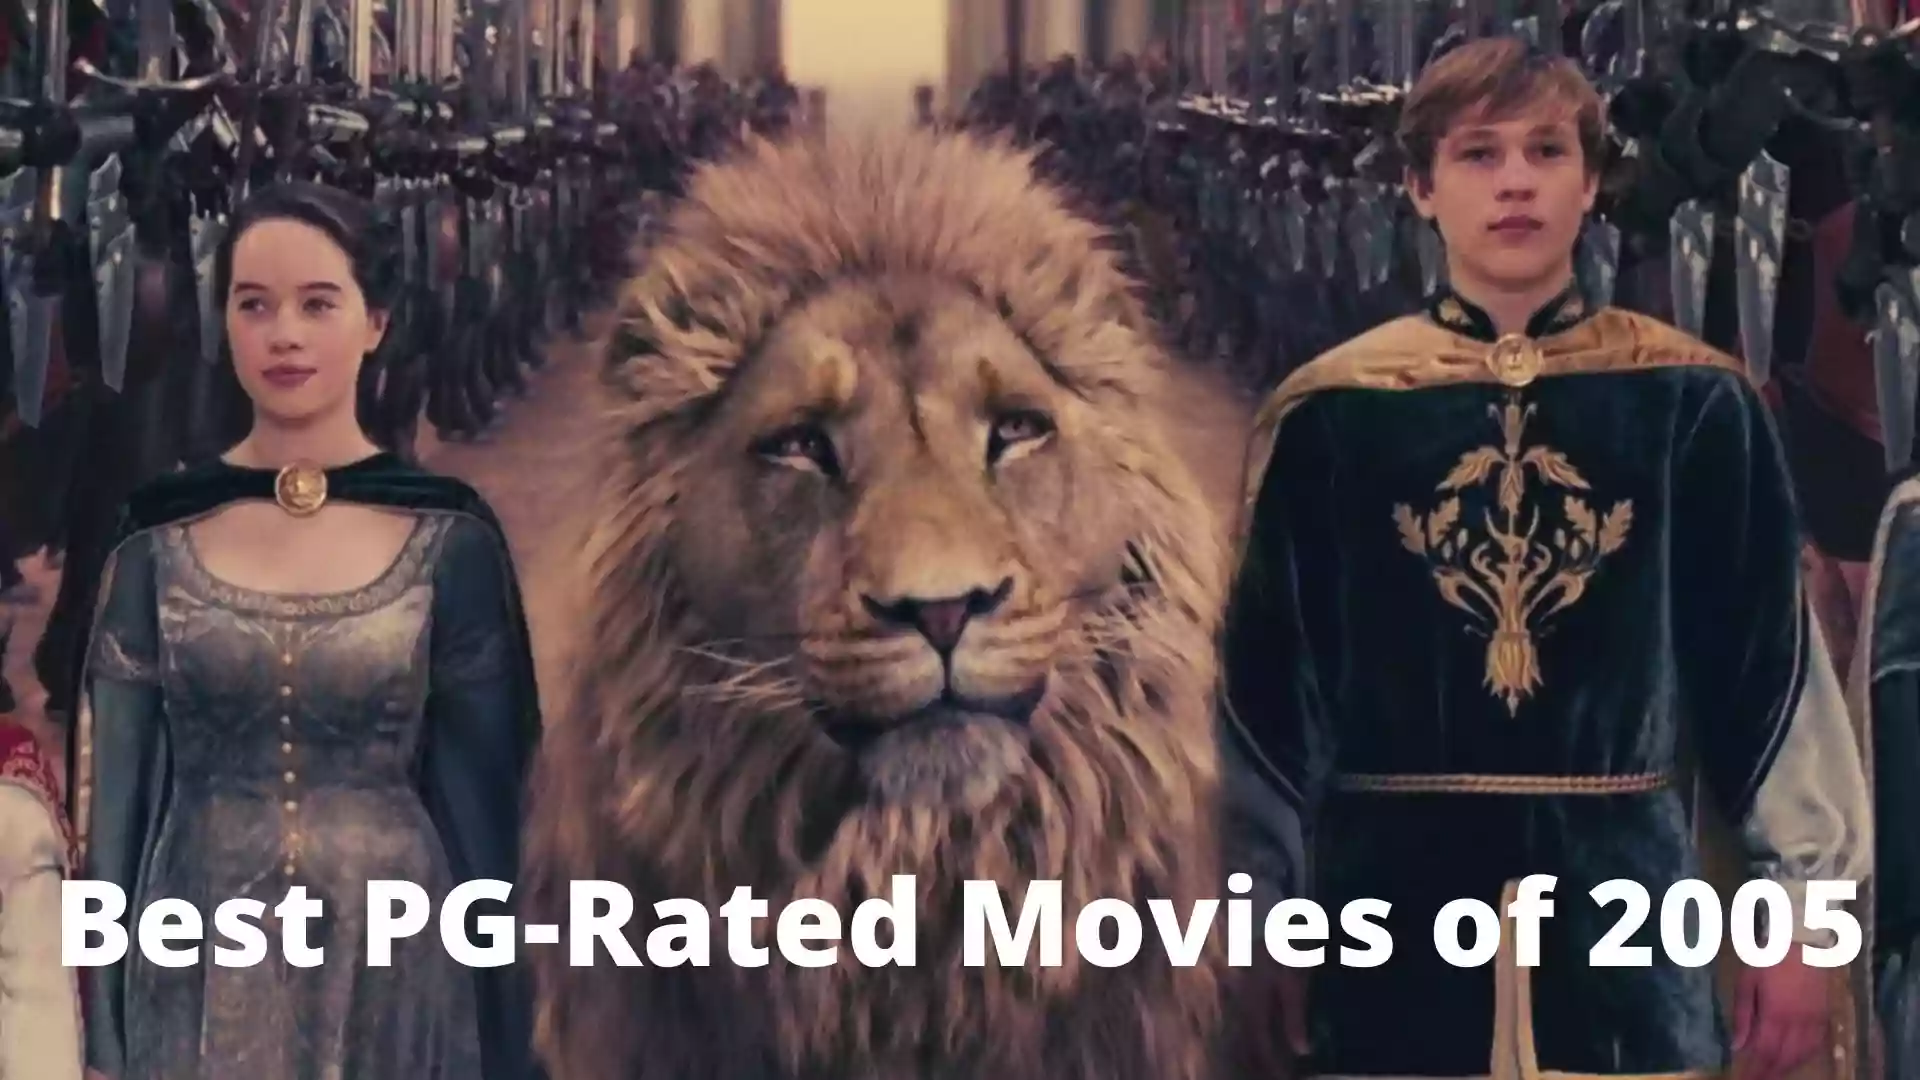 Best PG-Rated Movies of 2005